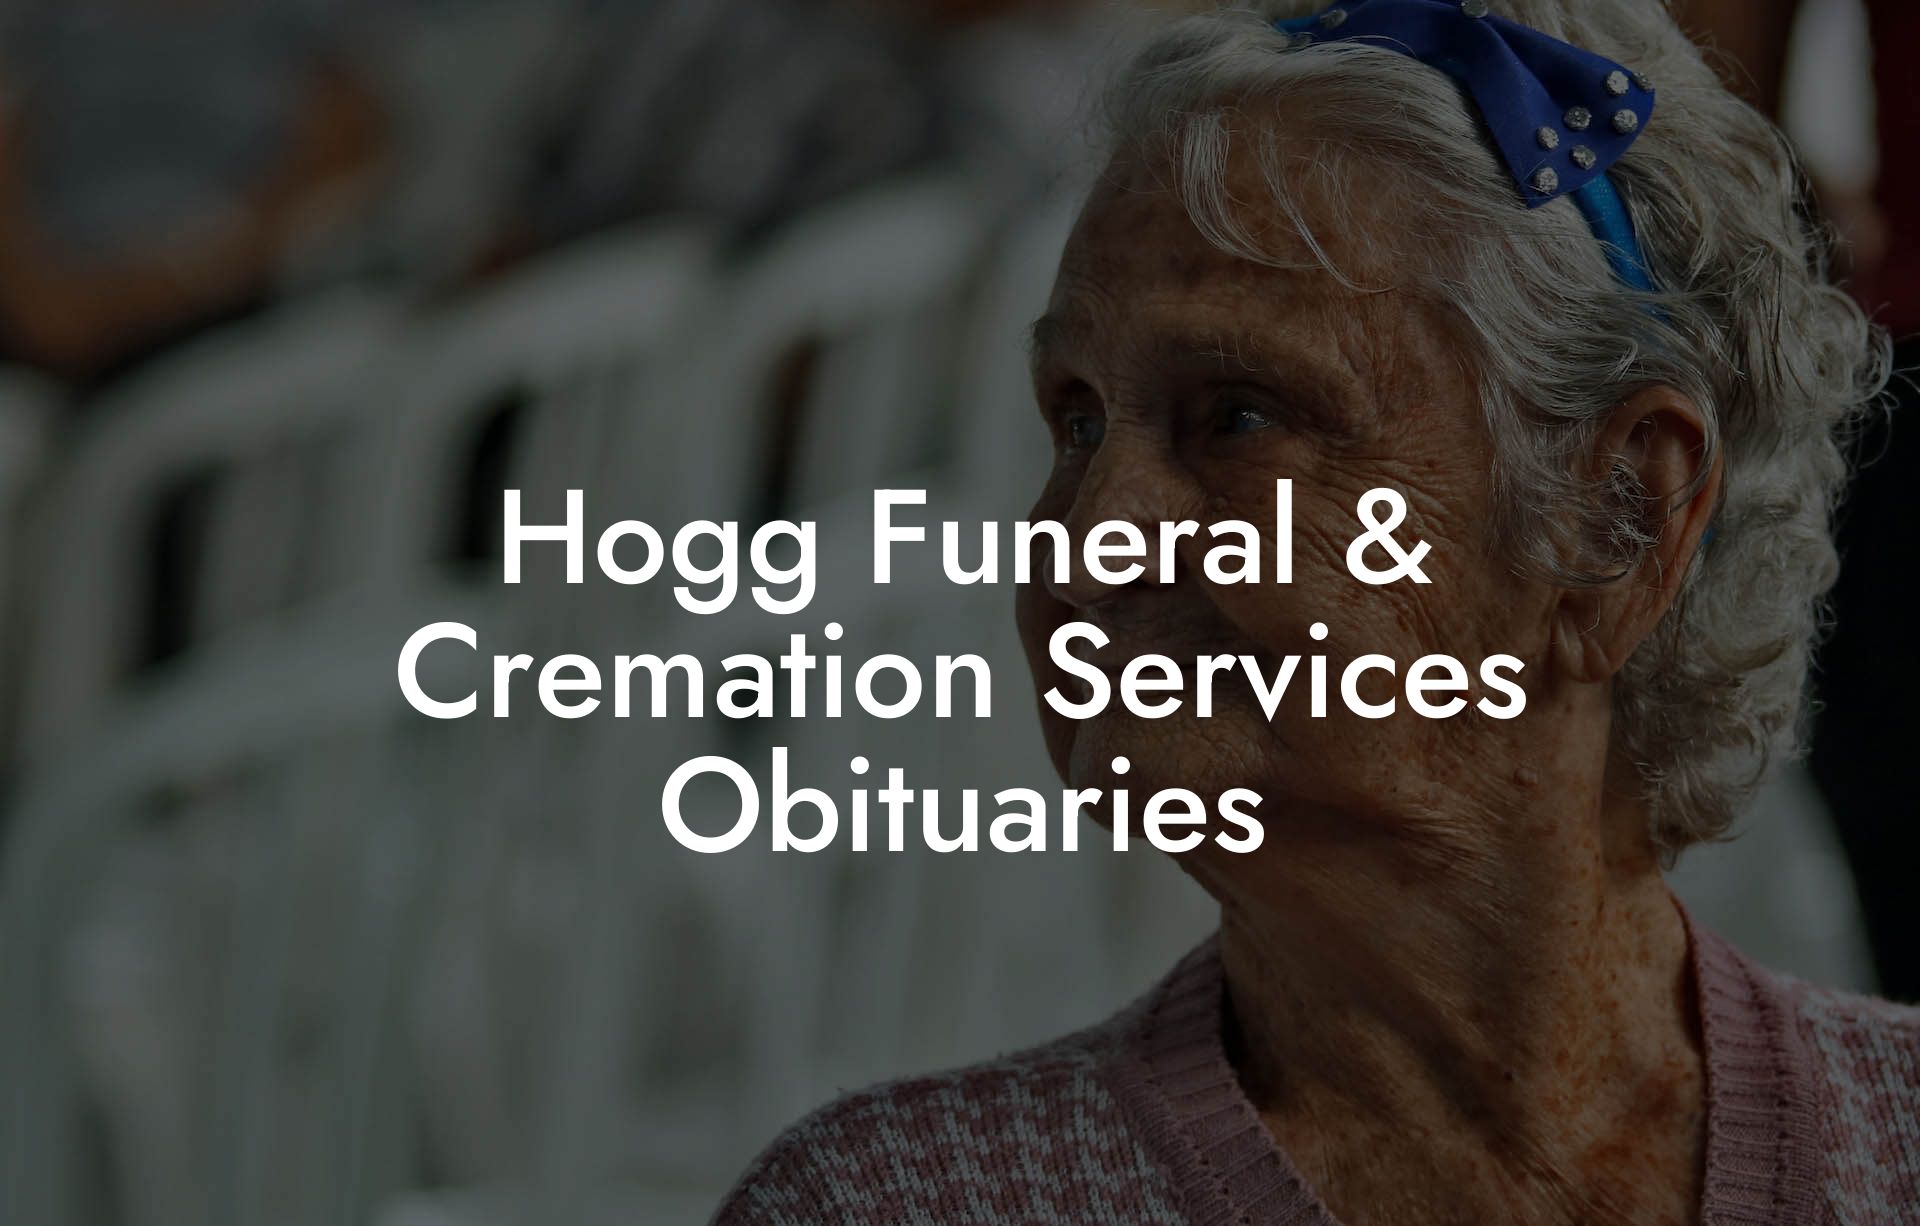 Hogg Funeral & Cremation Services Obituaries